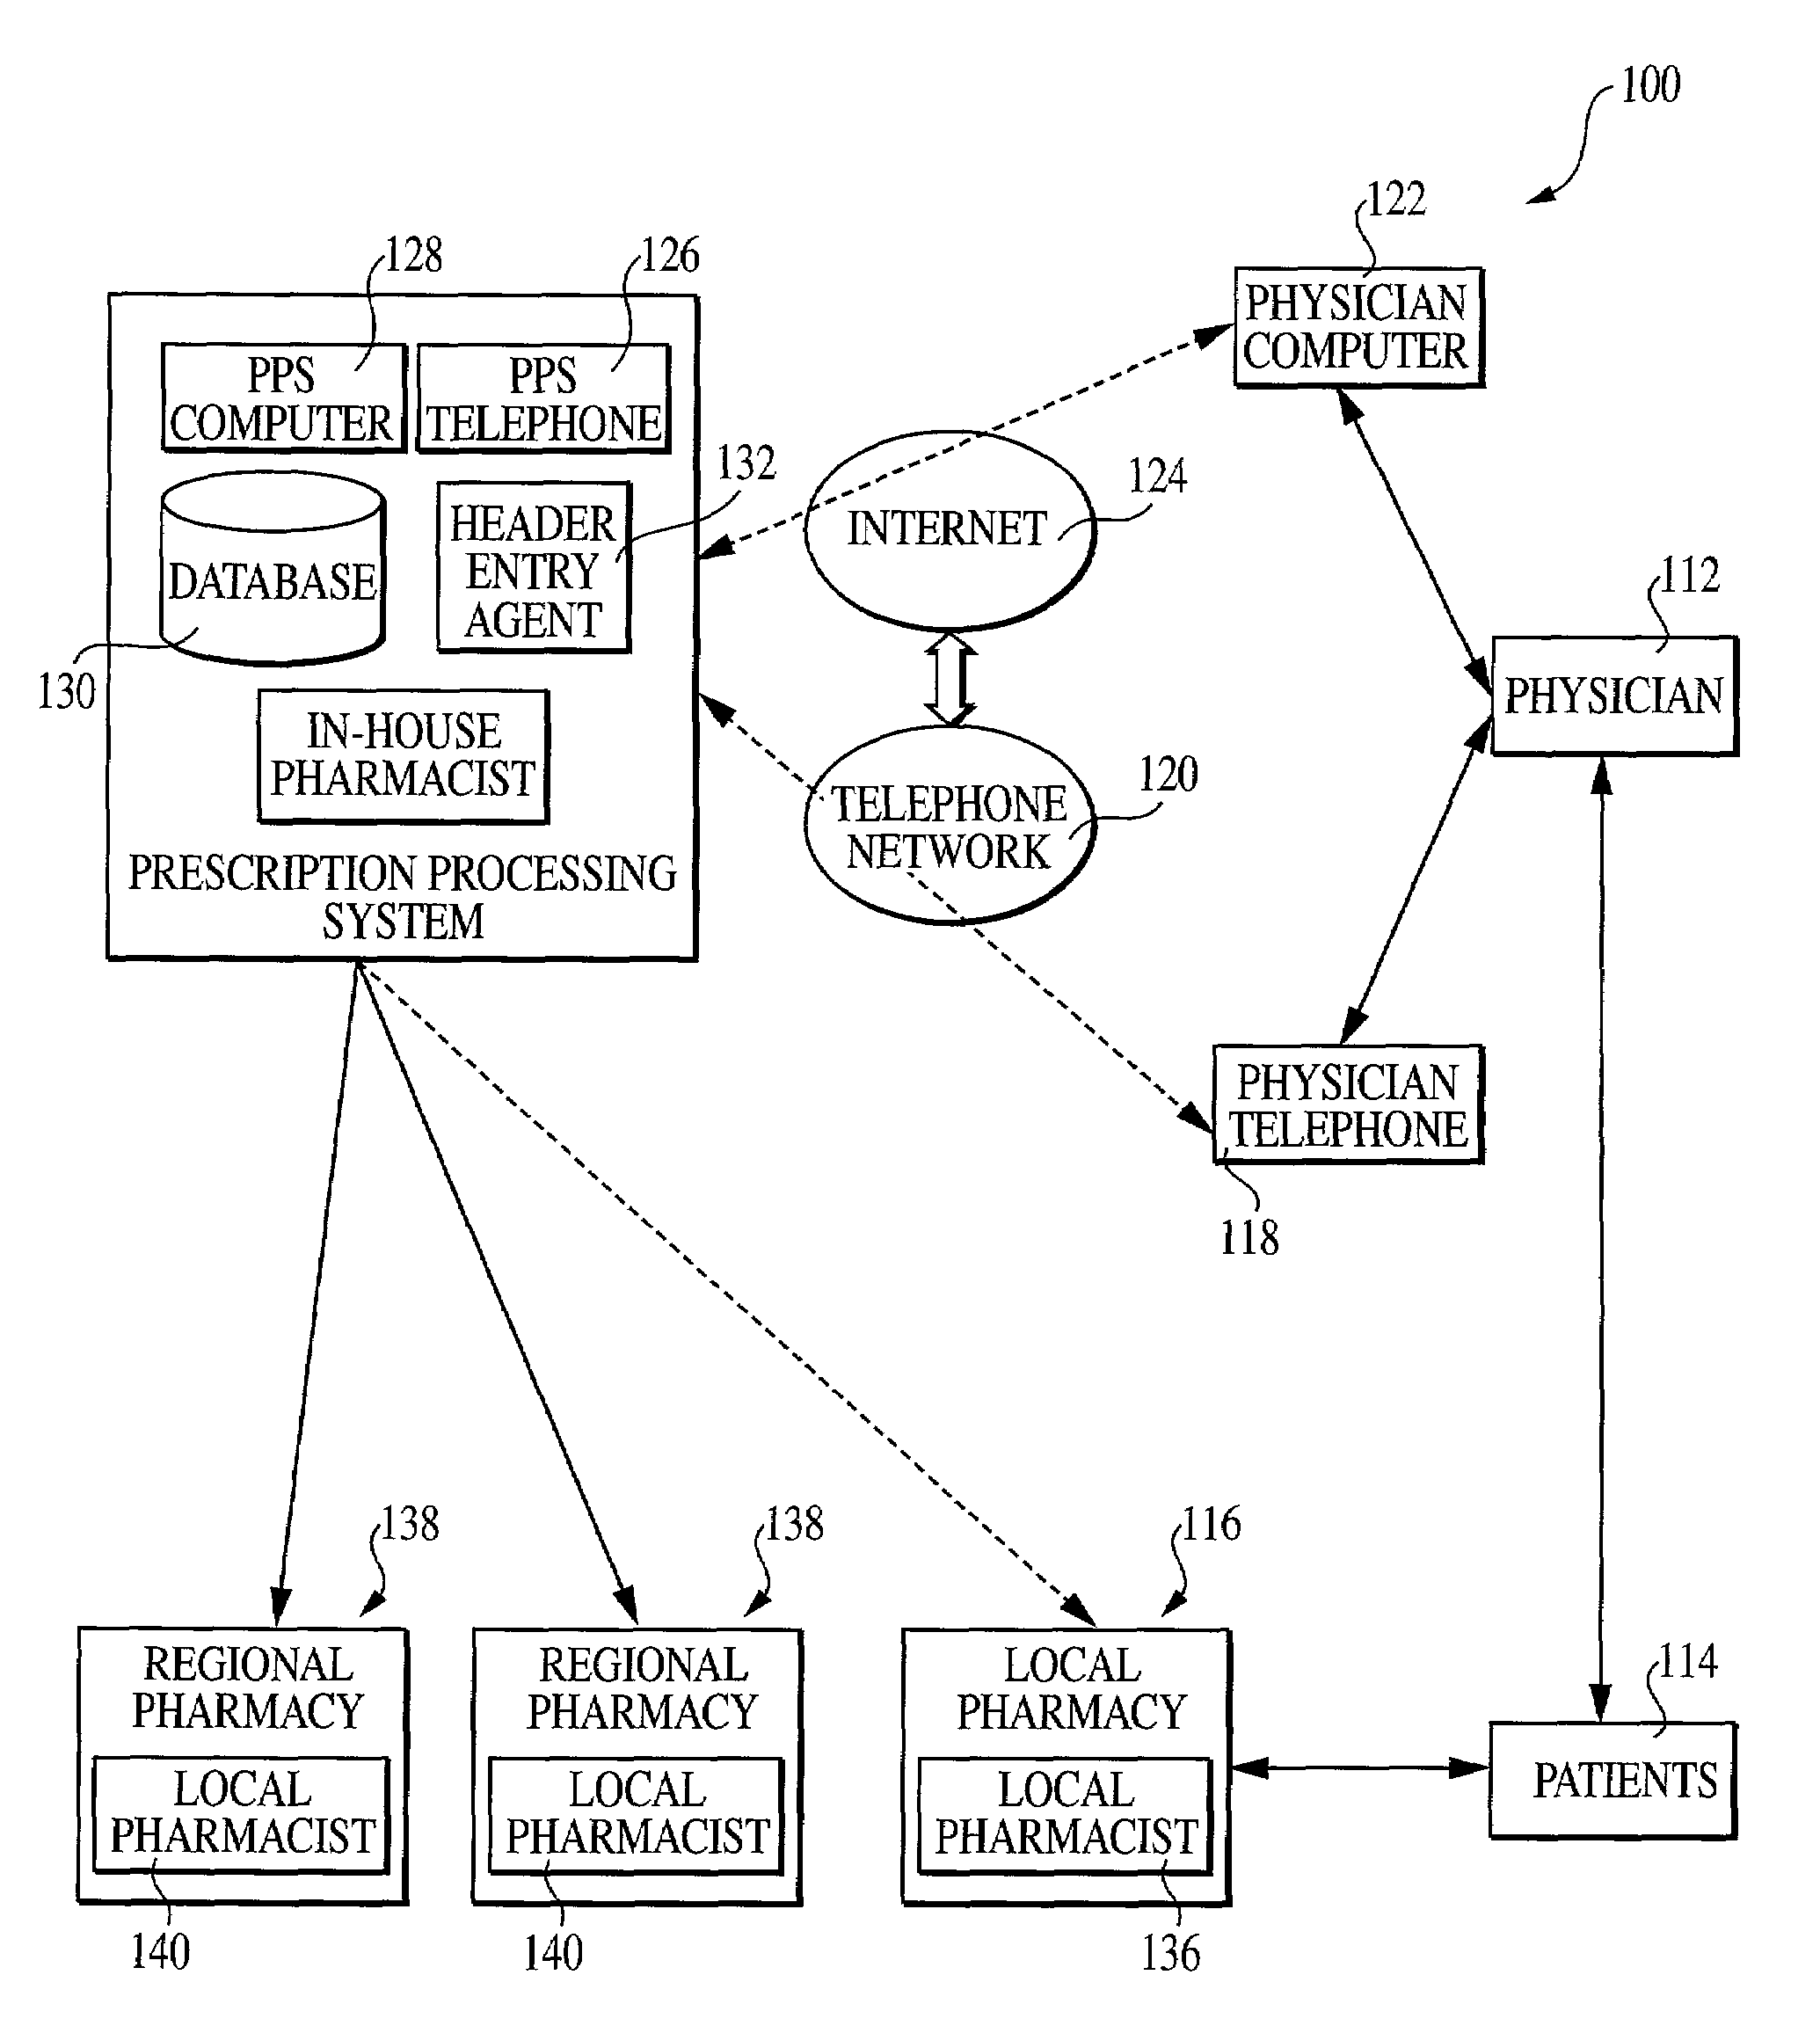 Apparatus and method for processing prescription requests using a remotely located prescription processing system